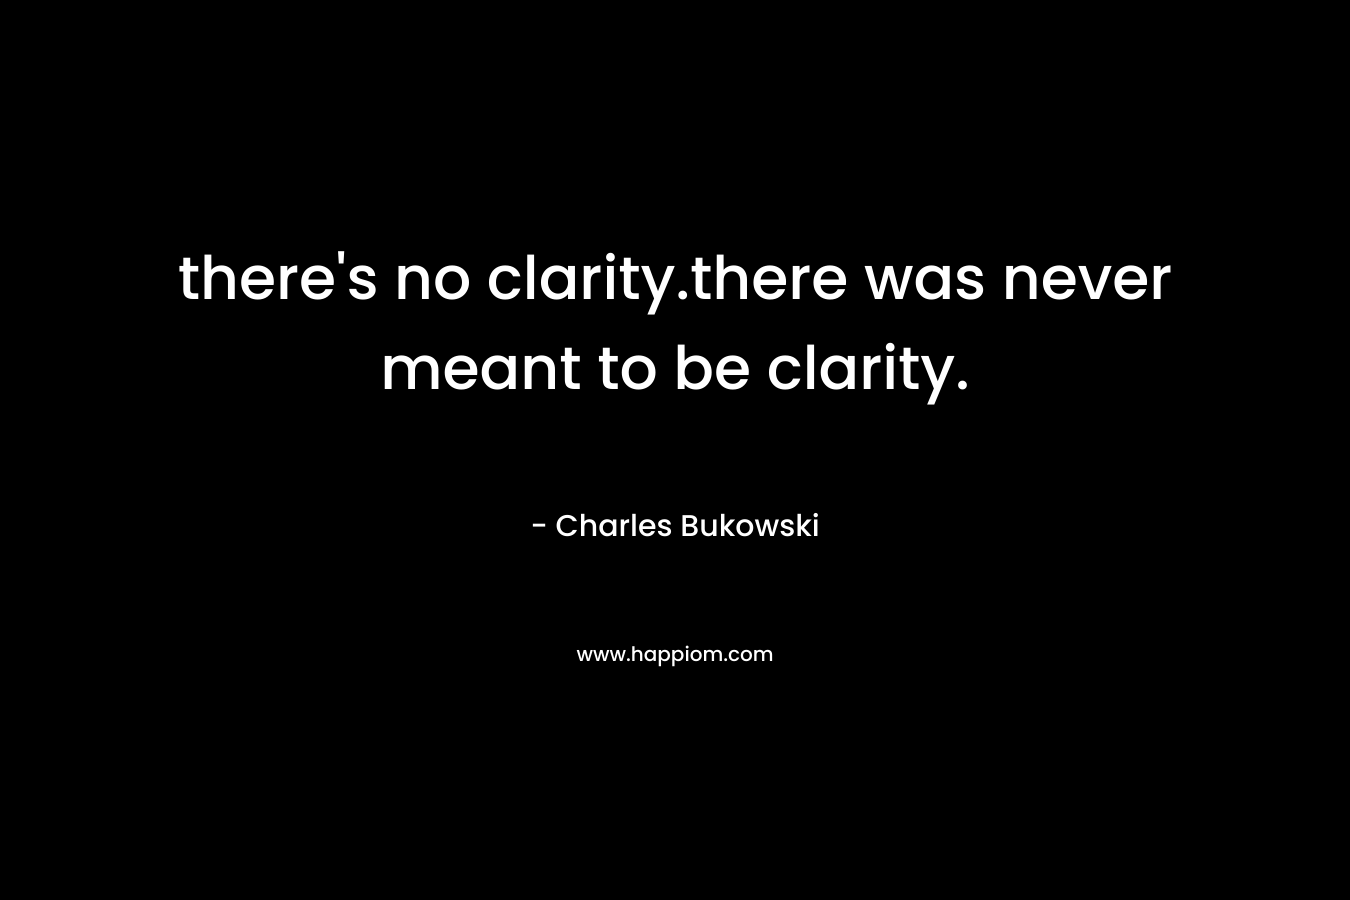 there's no clarity.there was never meant to be clarity.